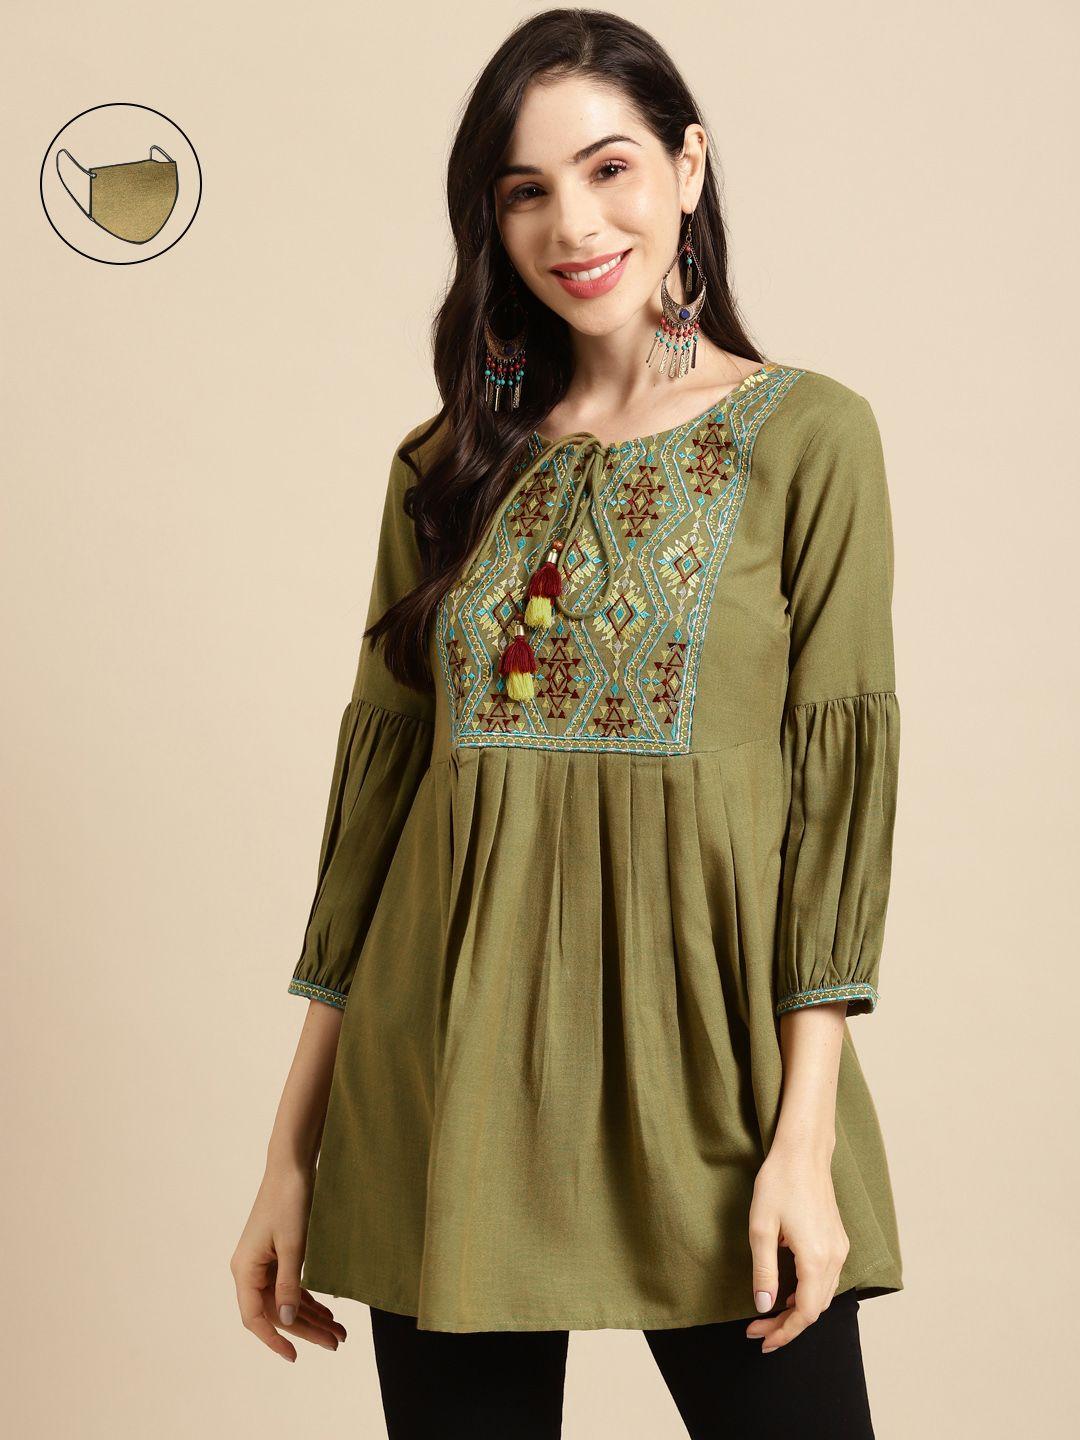 rangmayee olive green ethnic motifs embroidered gathered tunic with mask